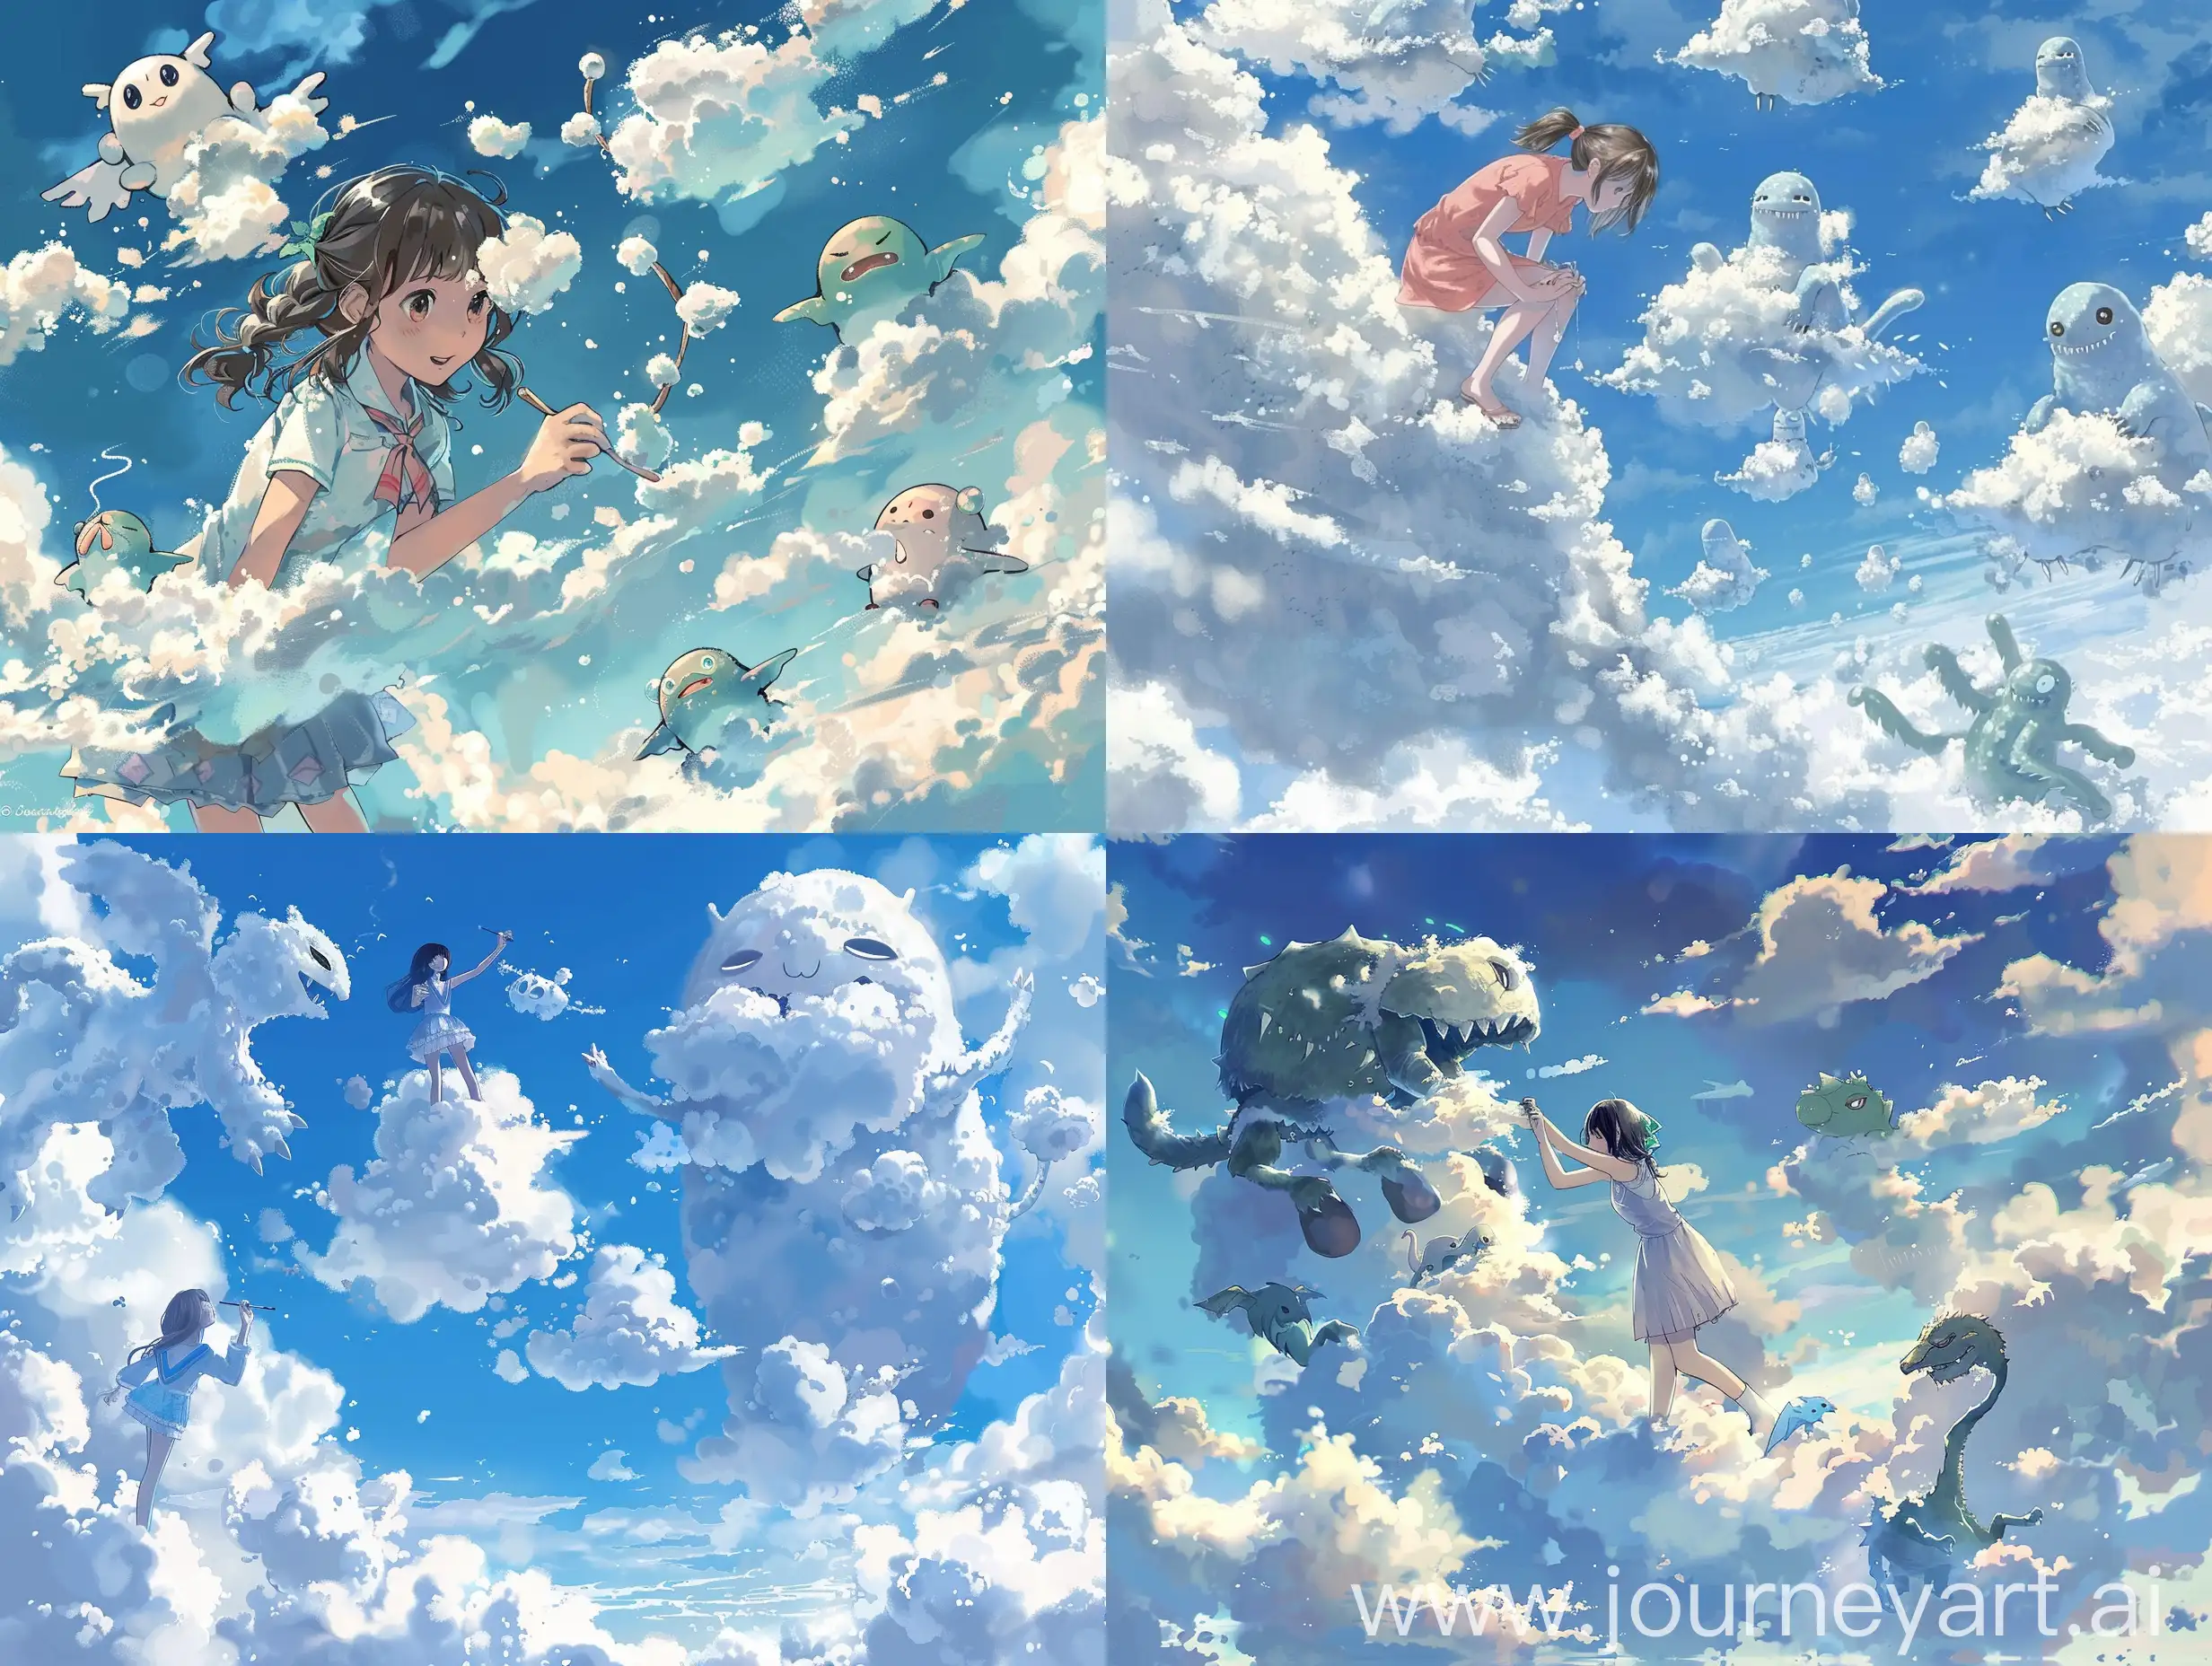 anime girl building creatures out of clouds in the sky